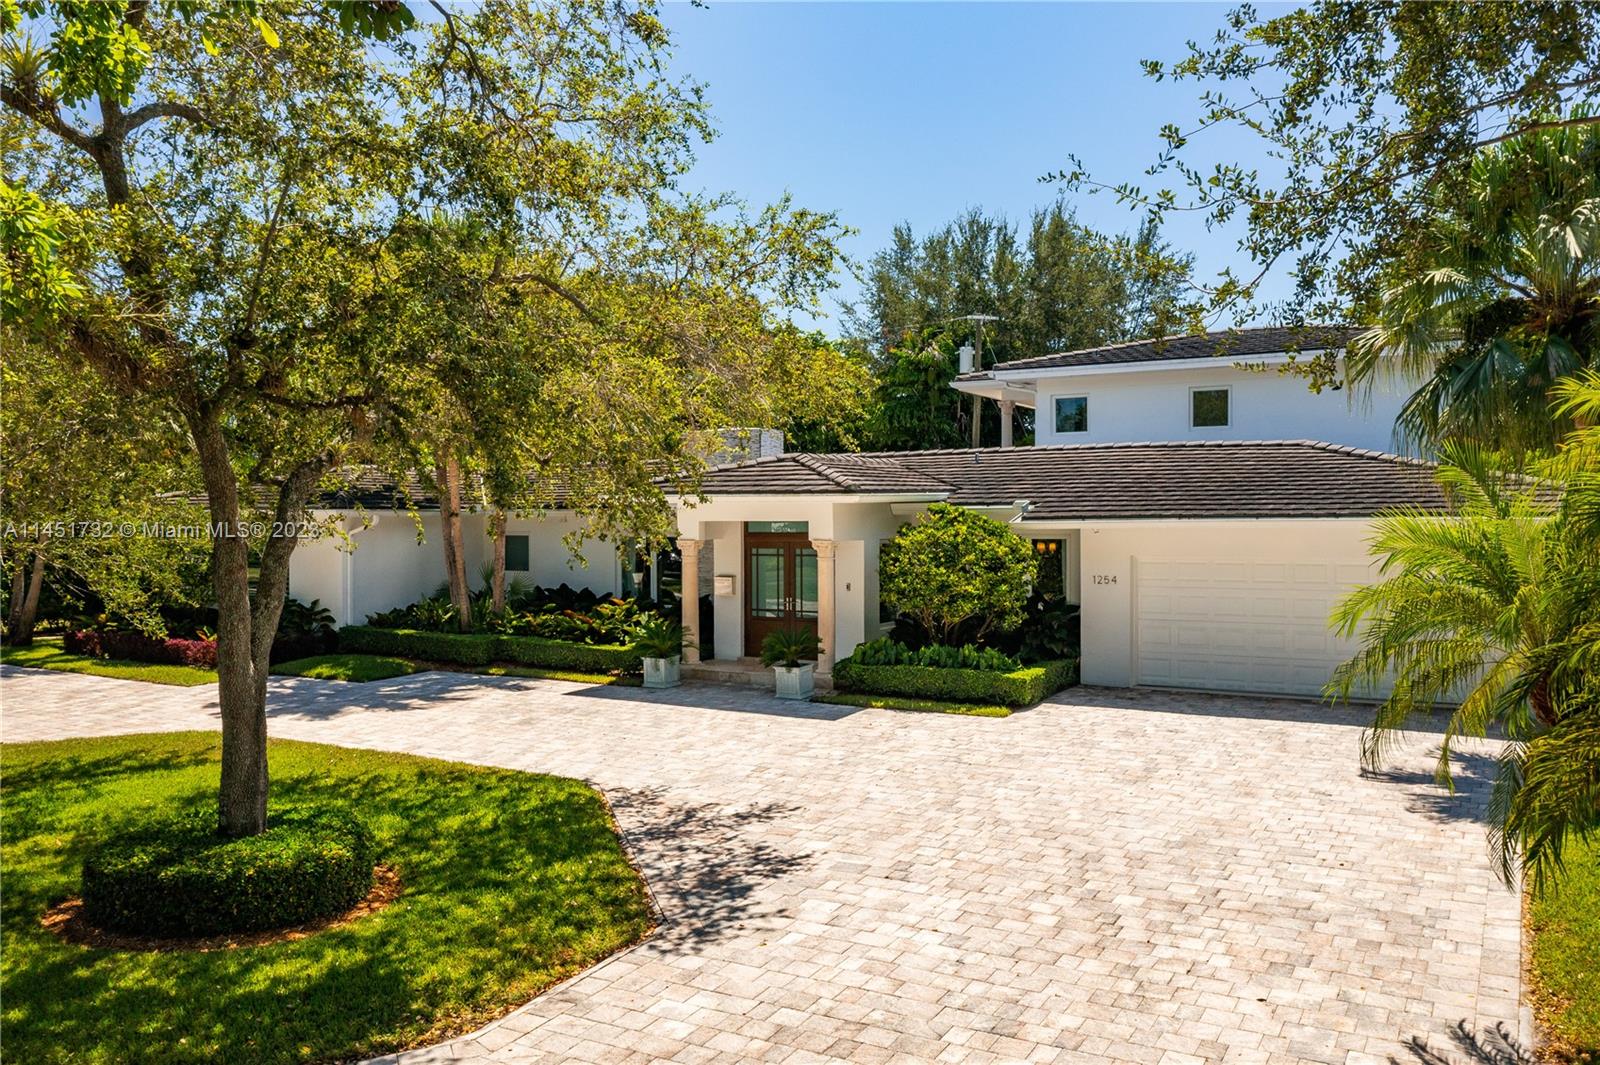 Fall in love with this captivating estate on a beautiful tree-lined street in Coral Gables! Situated on a private 13,200’ lot, this 4 bed/4 bath home radiates elegance, quality and sophistication from the moment you enter the foyer. Remodeled in 2015 with exquisite details, the wood floors, crown moldings, chair railings, and plantation shutters enhance the generous living spaces. The streamlined kitchen with its 5-burner range, island and marble counters adjoin the sun-filled family room. The spacious second floor primary suite and balcony overlook an inviting pool and lush garden. Impact doors & windows throughout as well as landscape lighting & camera systems. There is much to love in this stunning home with its close proximity to all that Coral Gables has to offer. A Very Special Home.